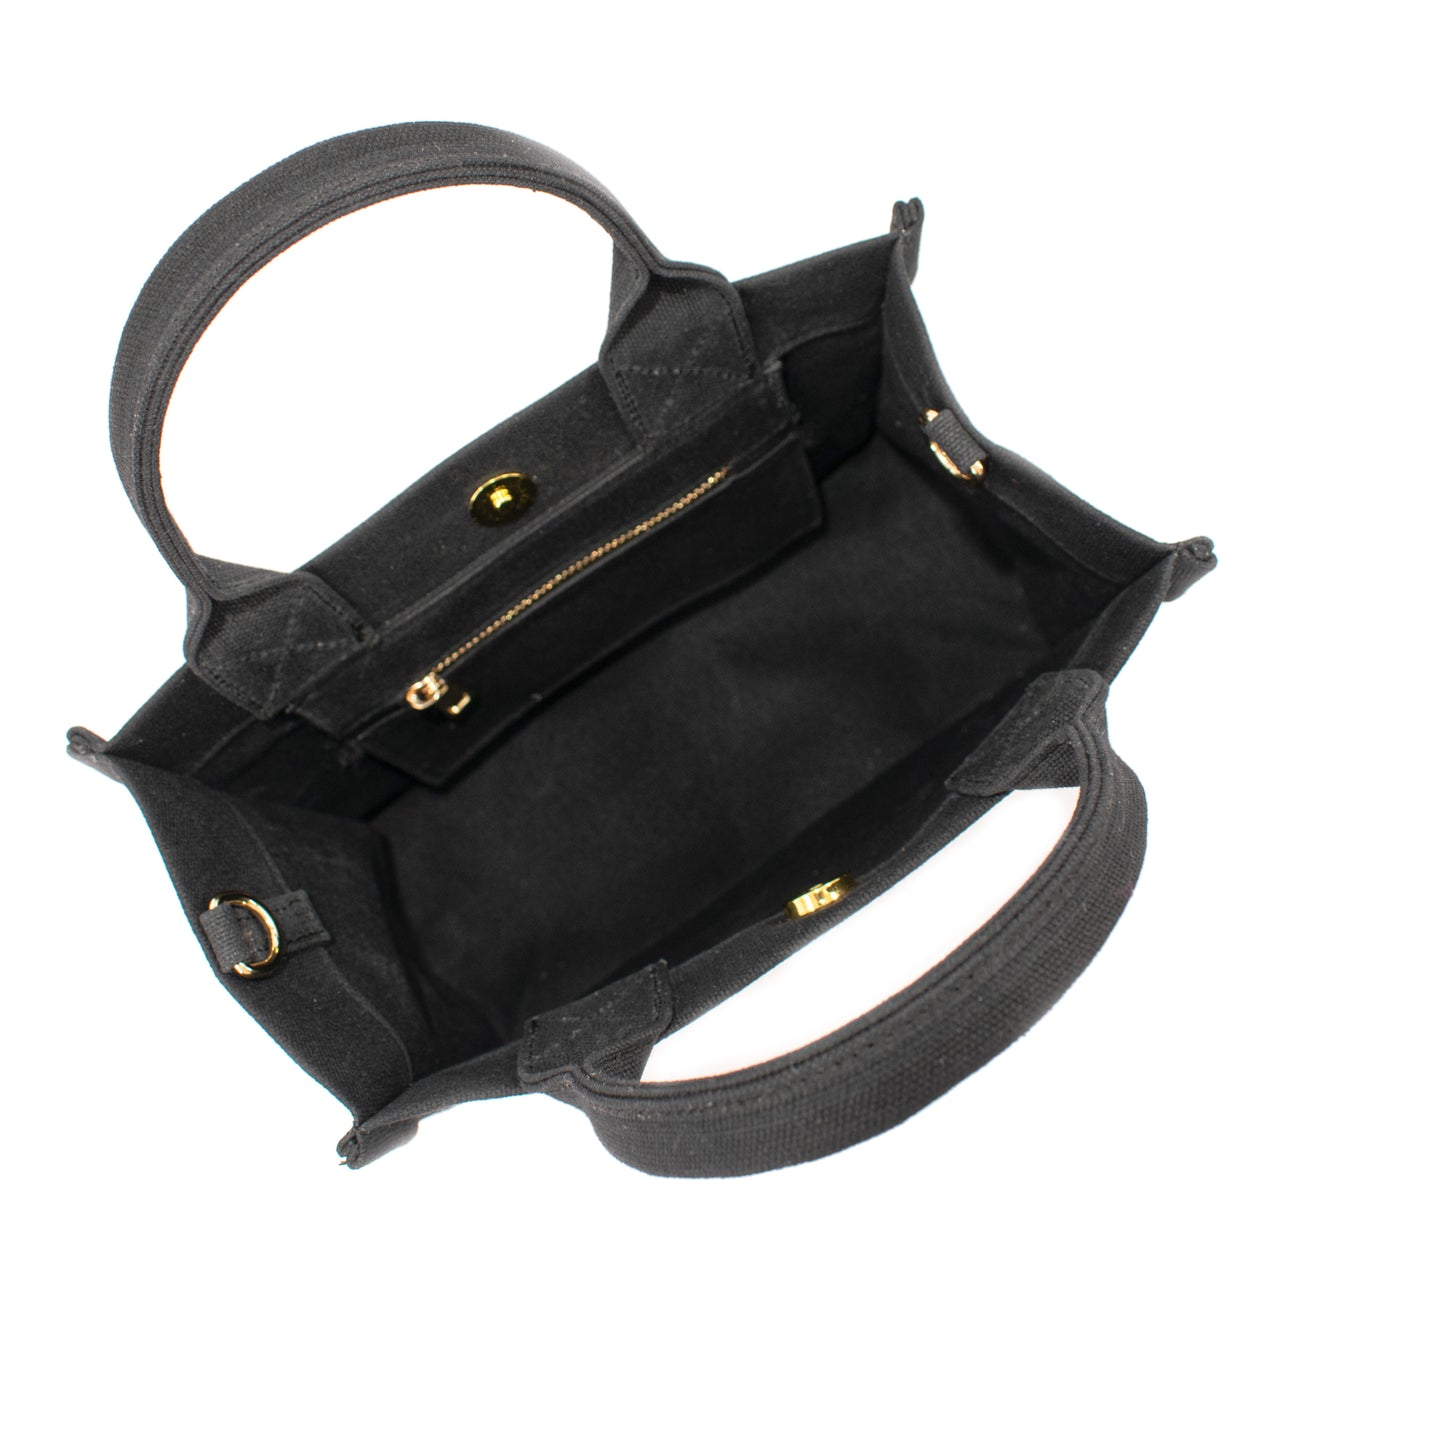 HCANSS WAXED CANVAS BLACK MINI TOTE BAG